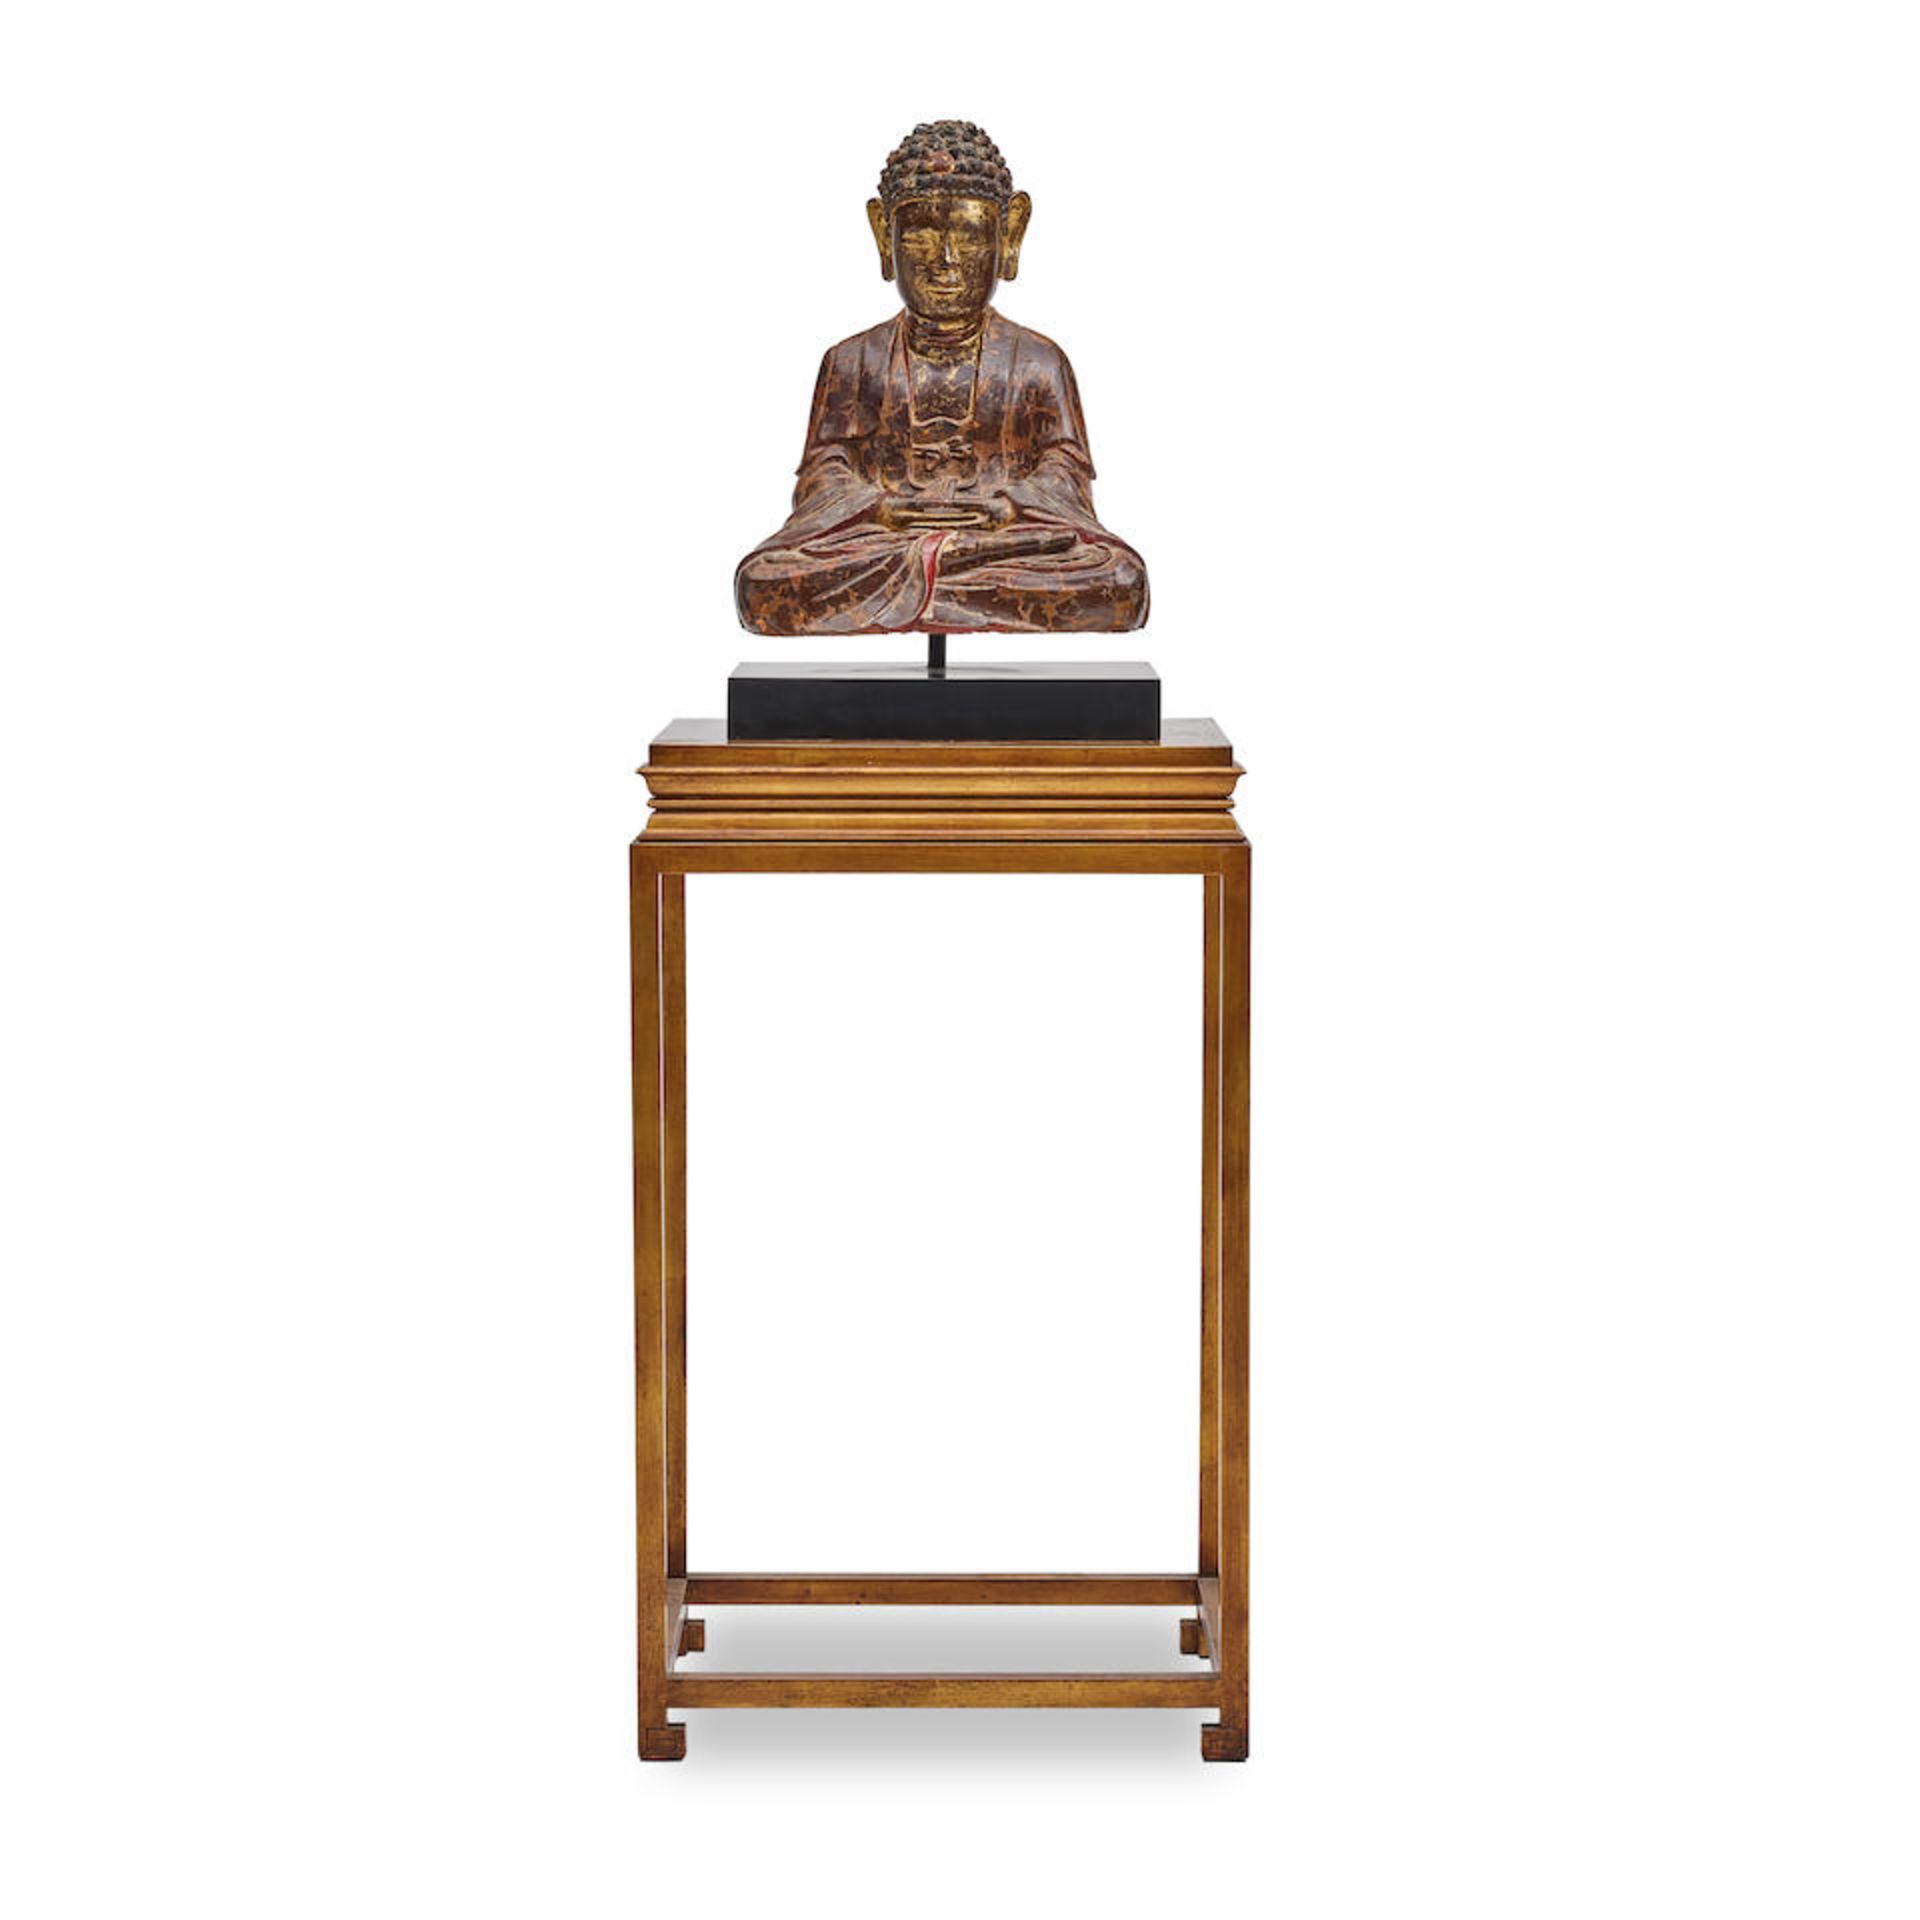 A CHINESE CARVED GILTWOOD FIGURE OF A SEATED BUDDHA20th century